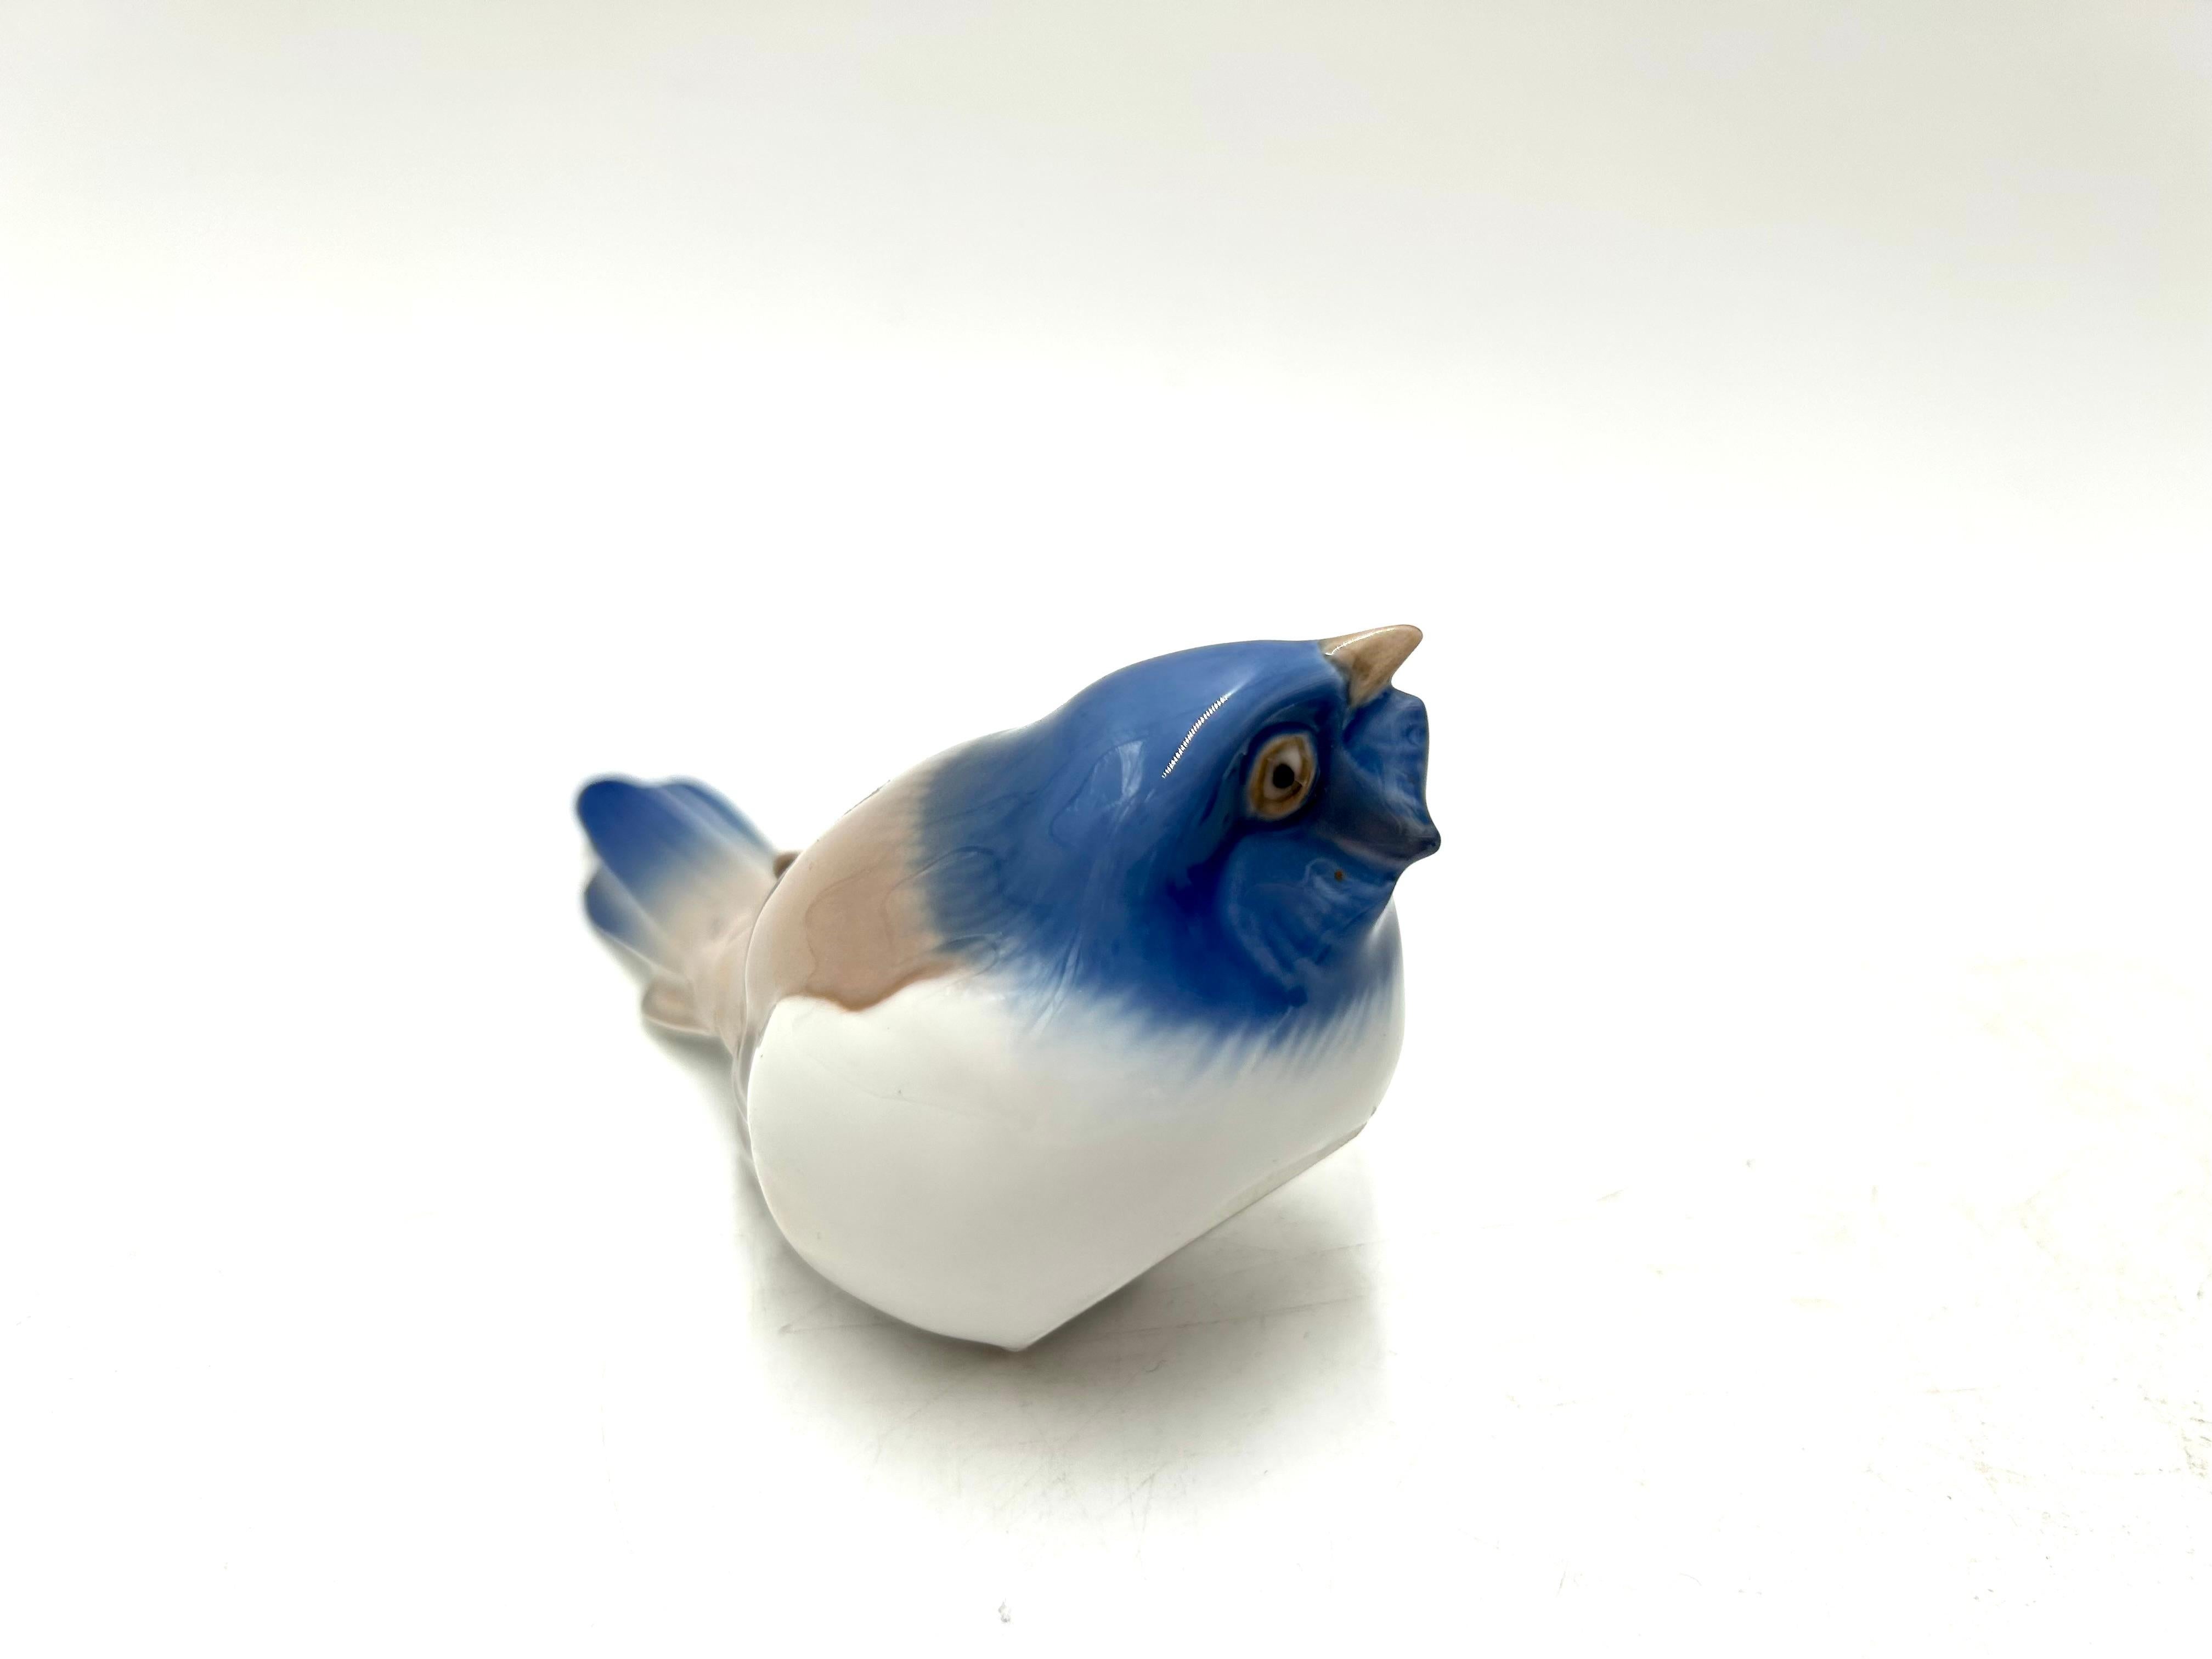 Porcelain bird figurine. Produced in Denmark by Bing & Grondahl in about 1948-1952.

Very good condition, no damage.

Measures: Height 7cm, width 12 cm, depth 9.5 cm.